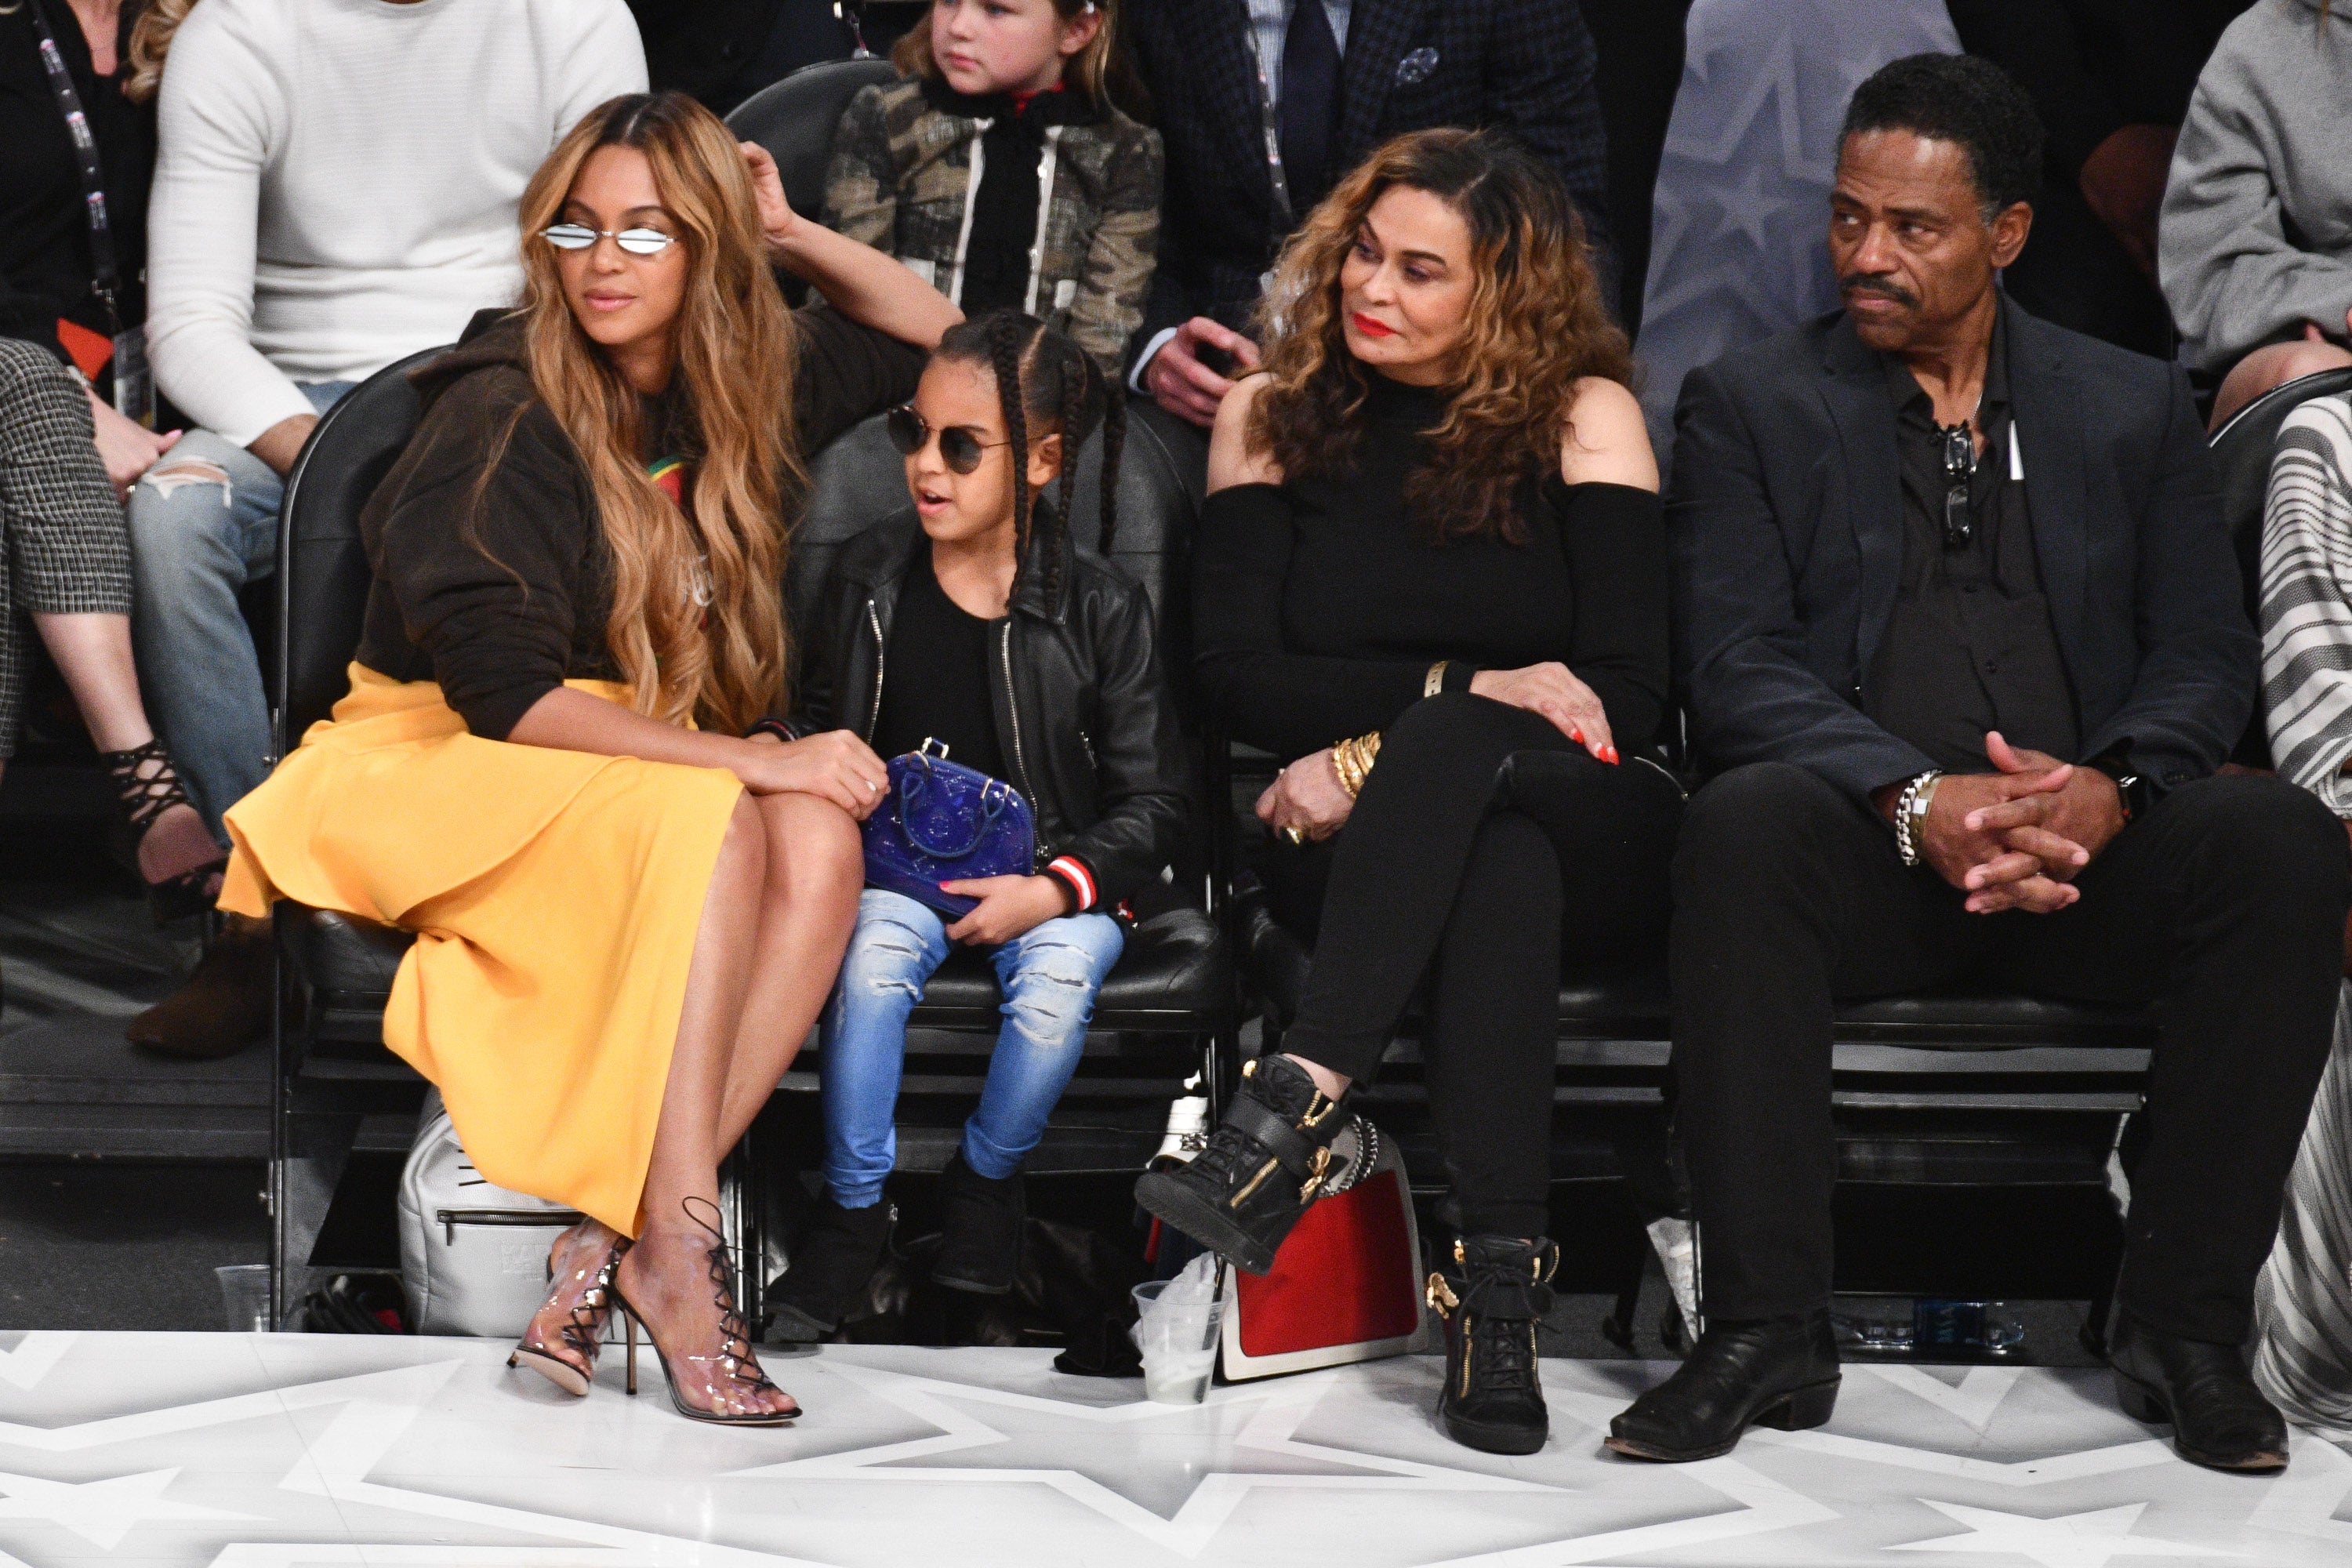 Beyonce And Blue Ivy Snap Mother-Daughter Selfies At The NBA All-Star Game